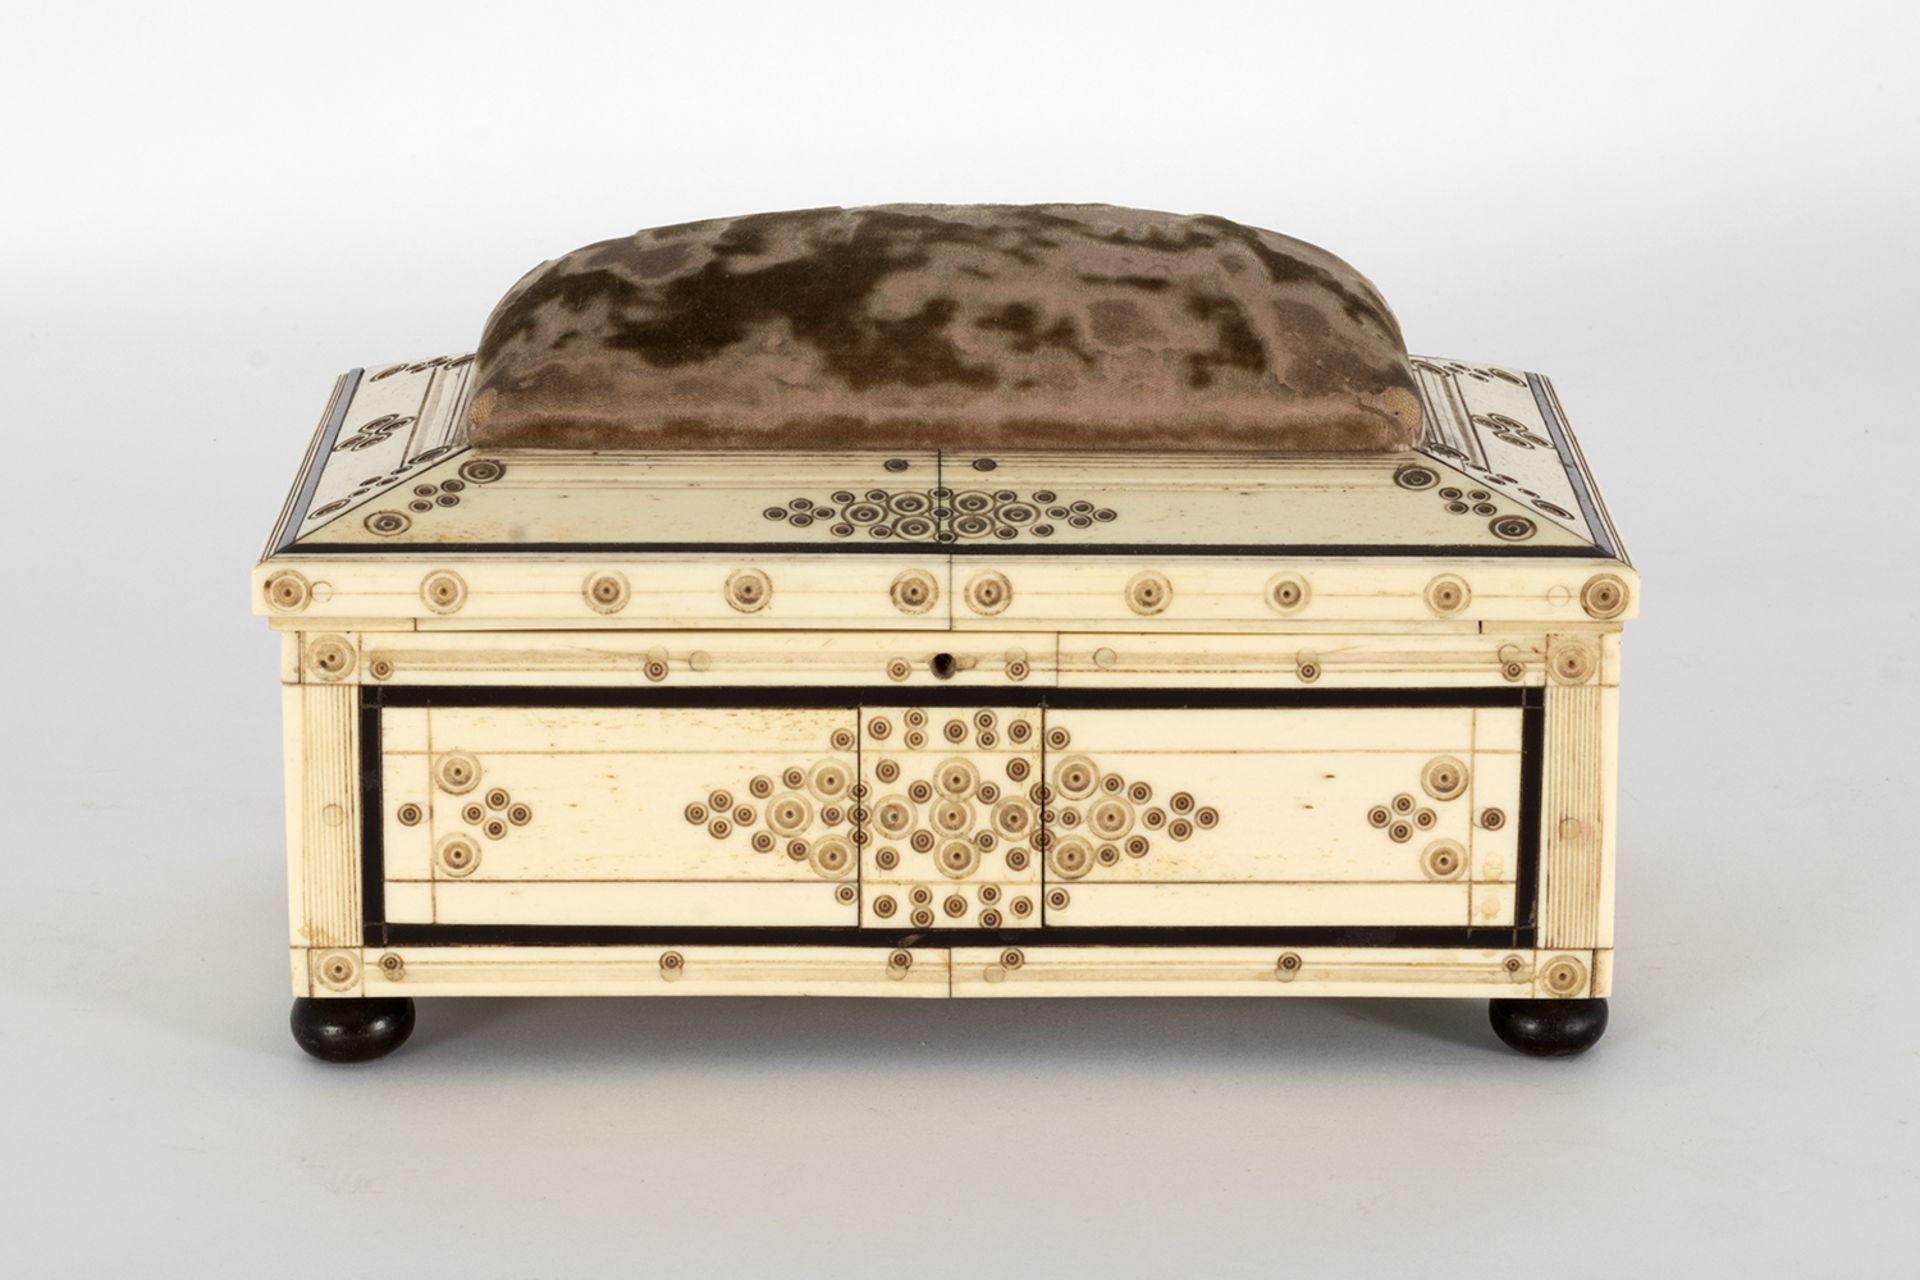 Anglo-Indian bone sewing box with geometric decoration and wooden core, late 19th century.